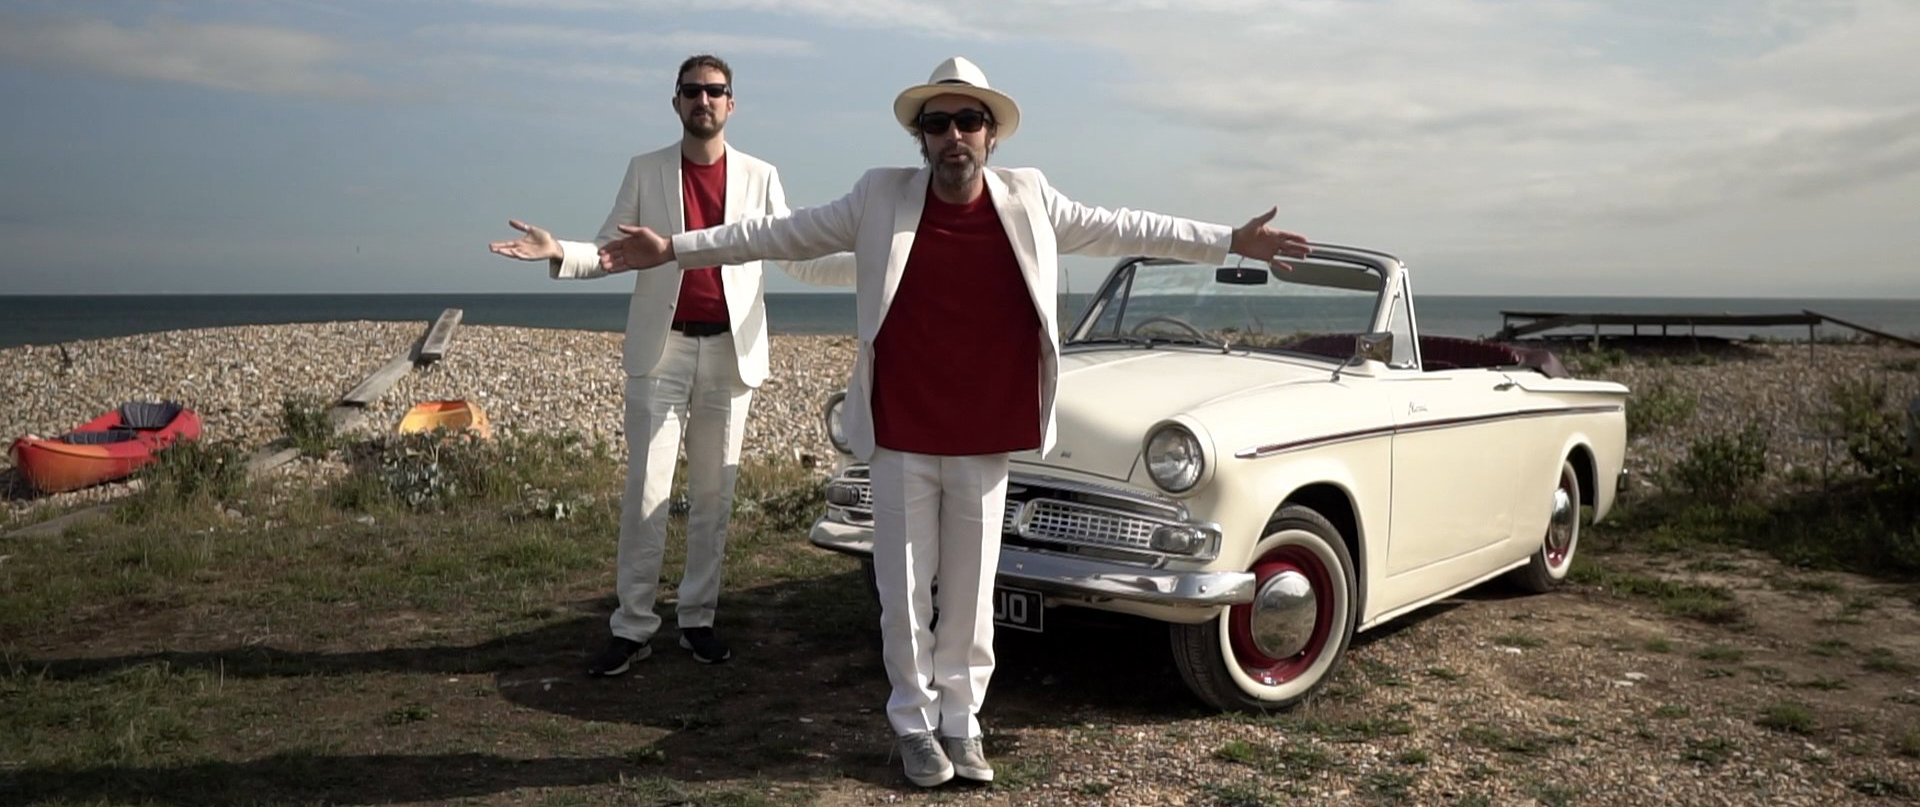 BEANS ON TOAST releases video for new single 'The Village Disco' Feat: FRANK TURNER 3